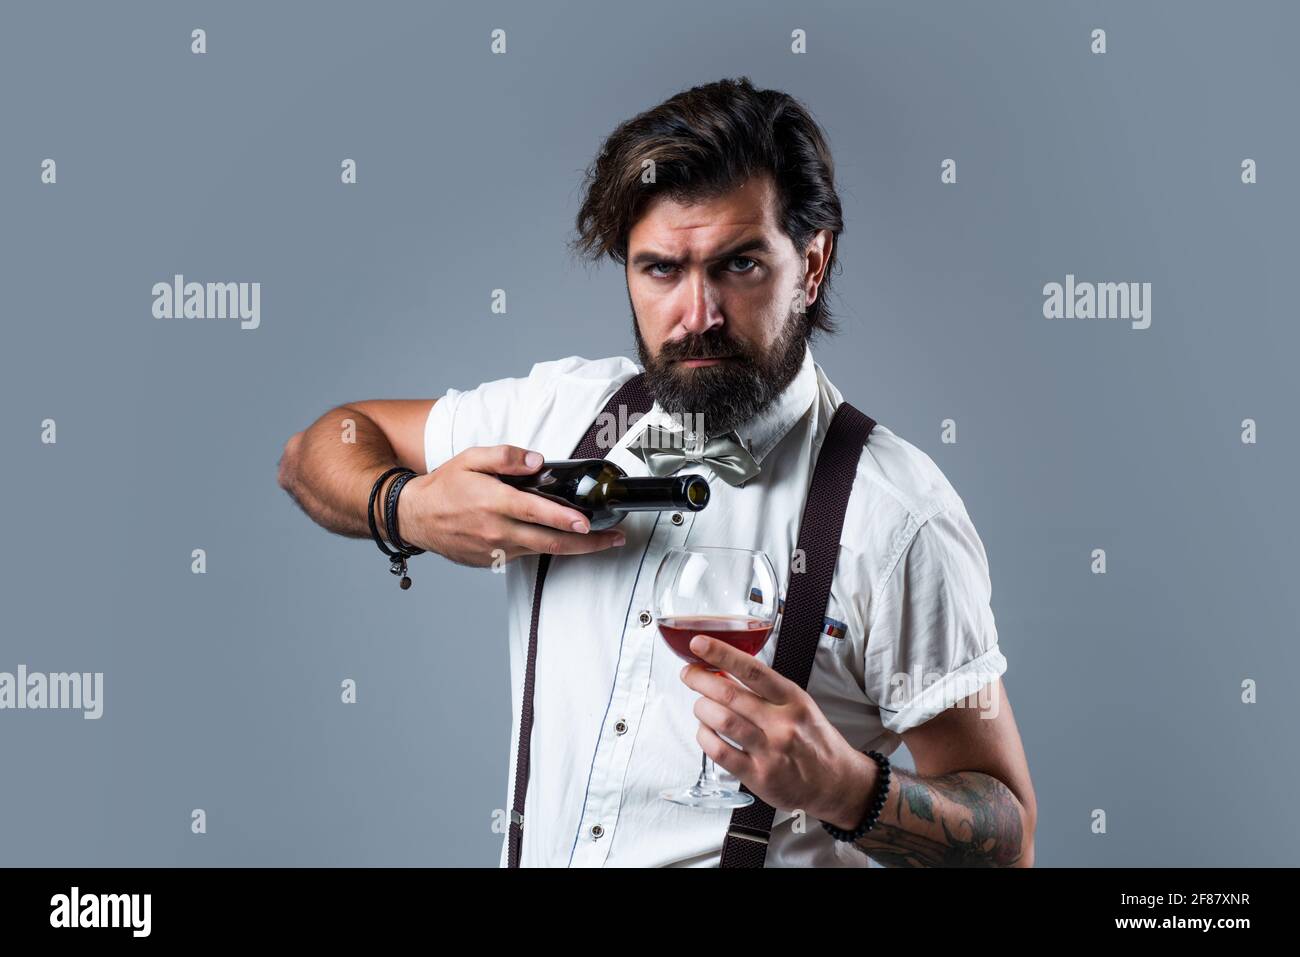 brutal bearded male with stylish look drink wine, barkeeper Stock Photo